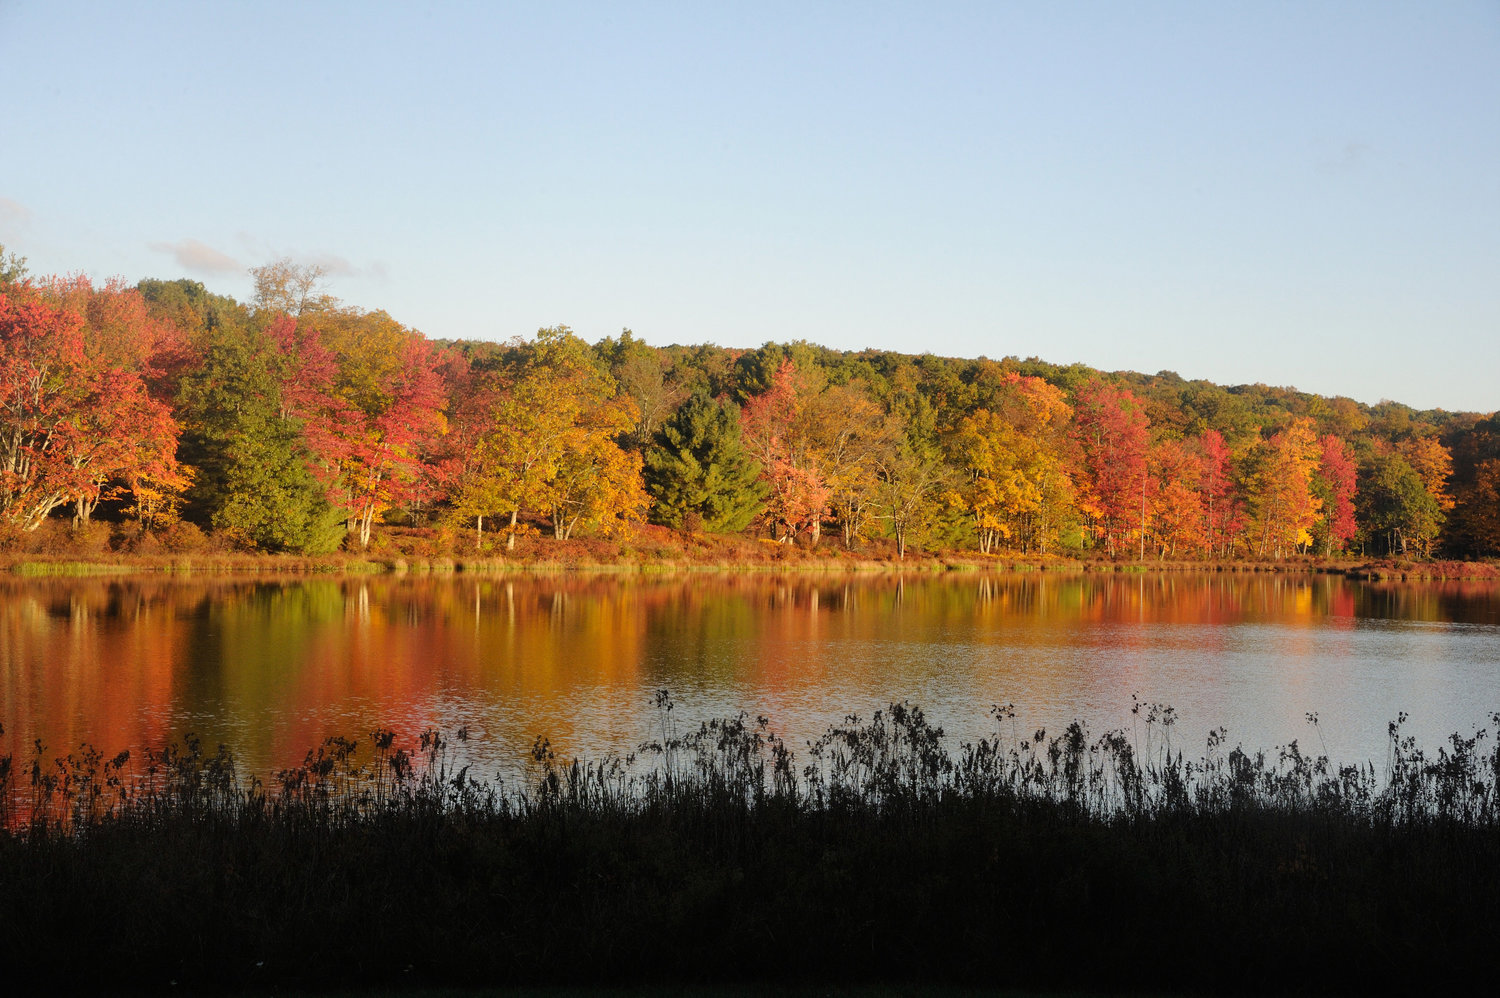 Lily Pond, near Milford, is mostly deciduous forest near the shoreline of the lake, and the light of dawn accentuates the already-rich colors of the fall foliage here. Sunlight travels through much more atmosphere during sunrise and sunset; this light is more towards the red part of the spectrum.